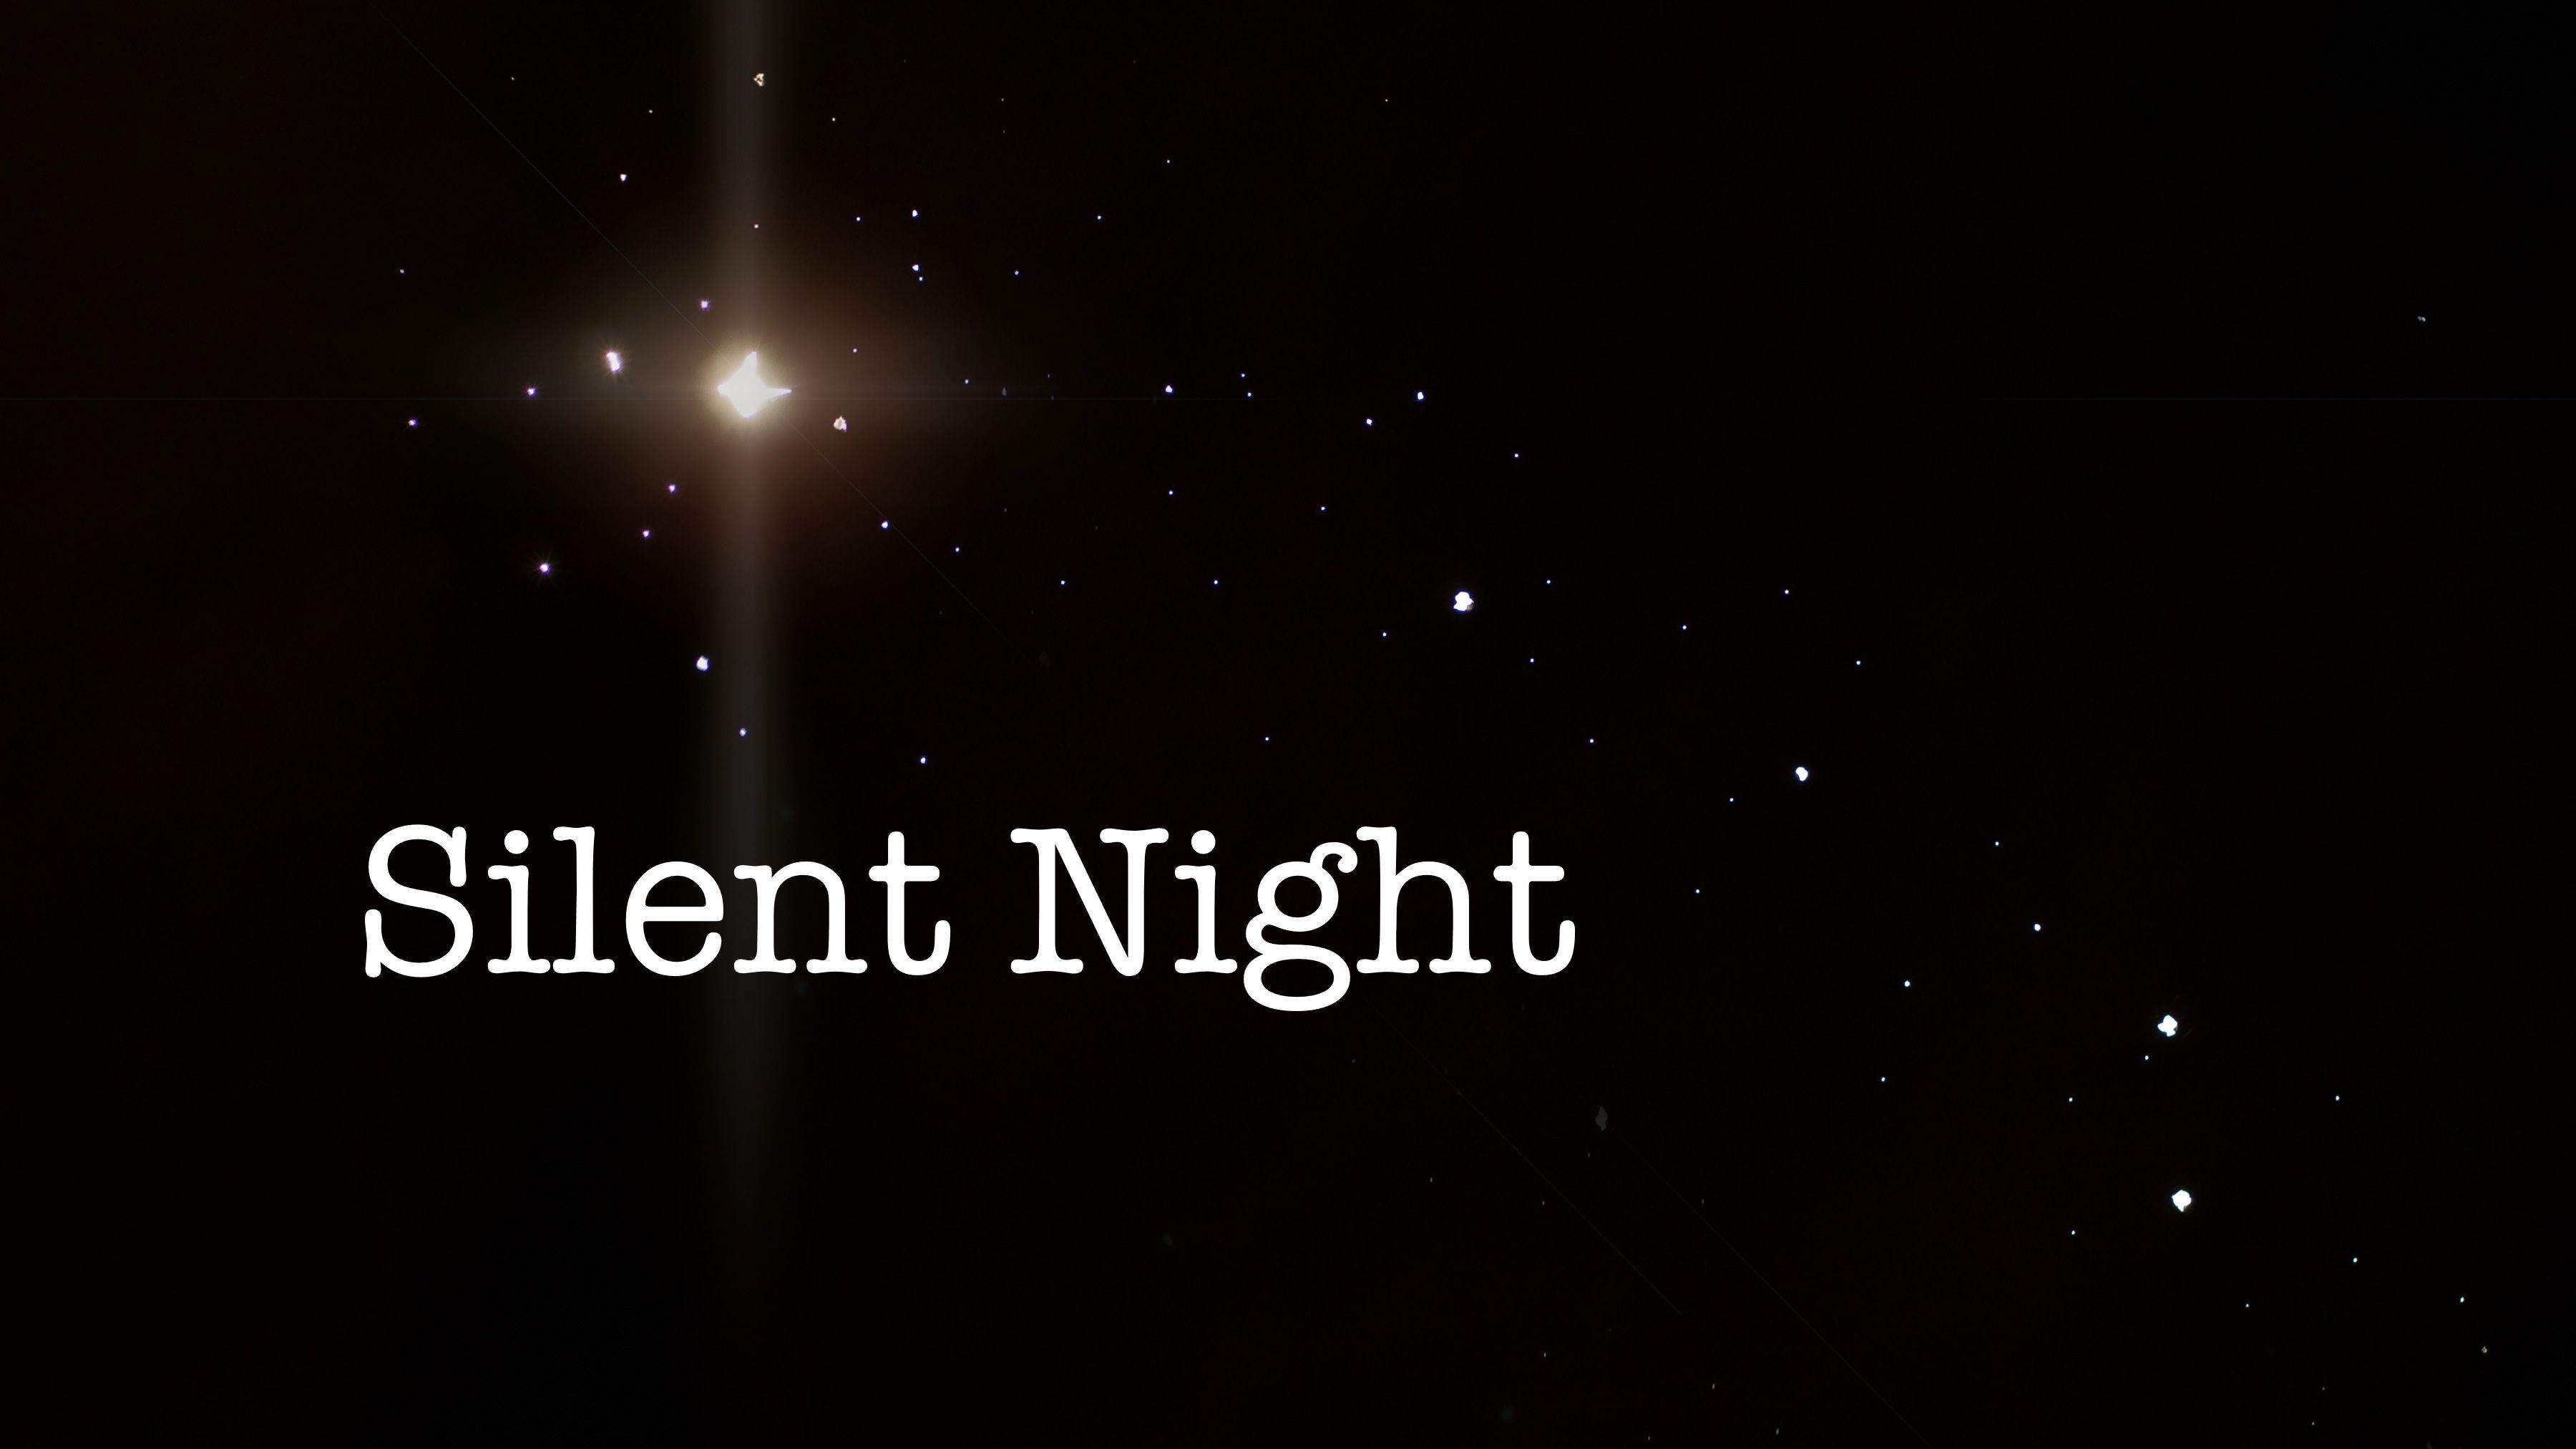 Silent Night Wallpapers - Top Free Silent Night Backgrounds